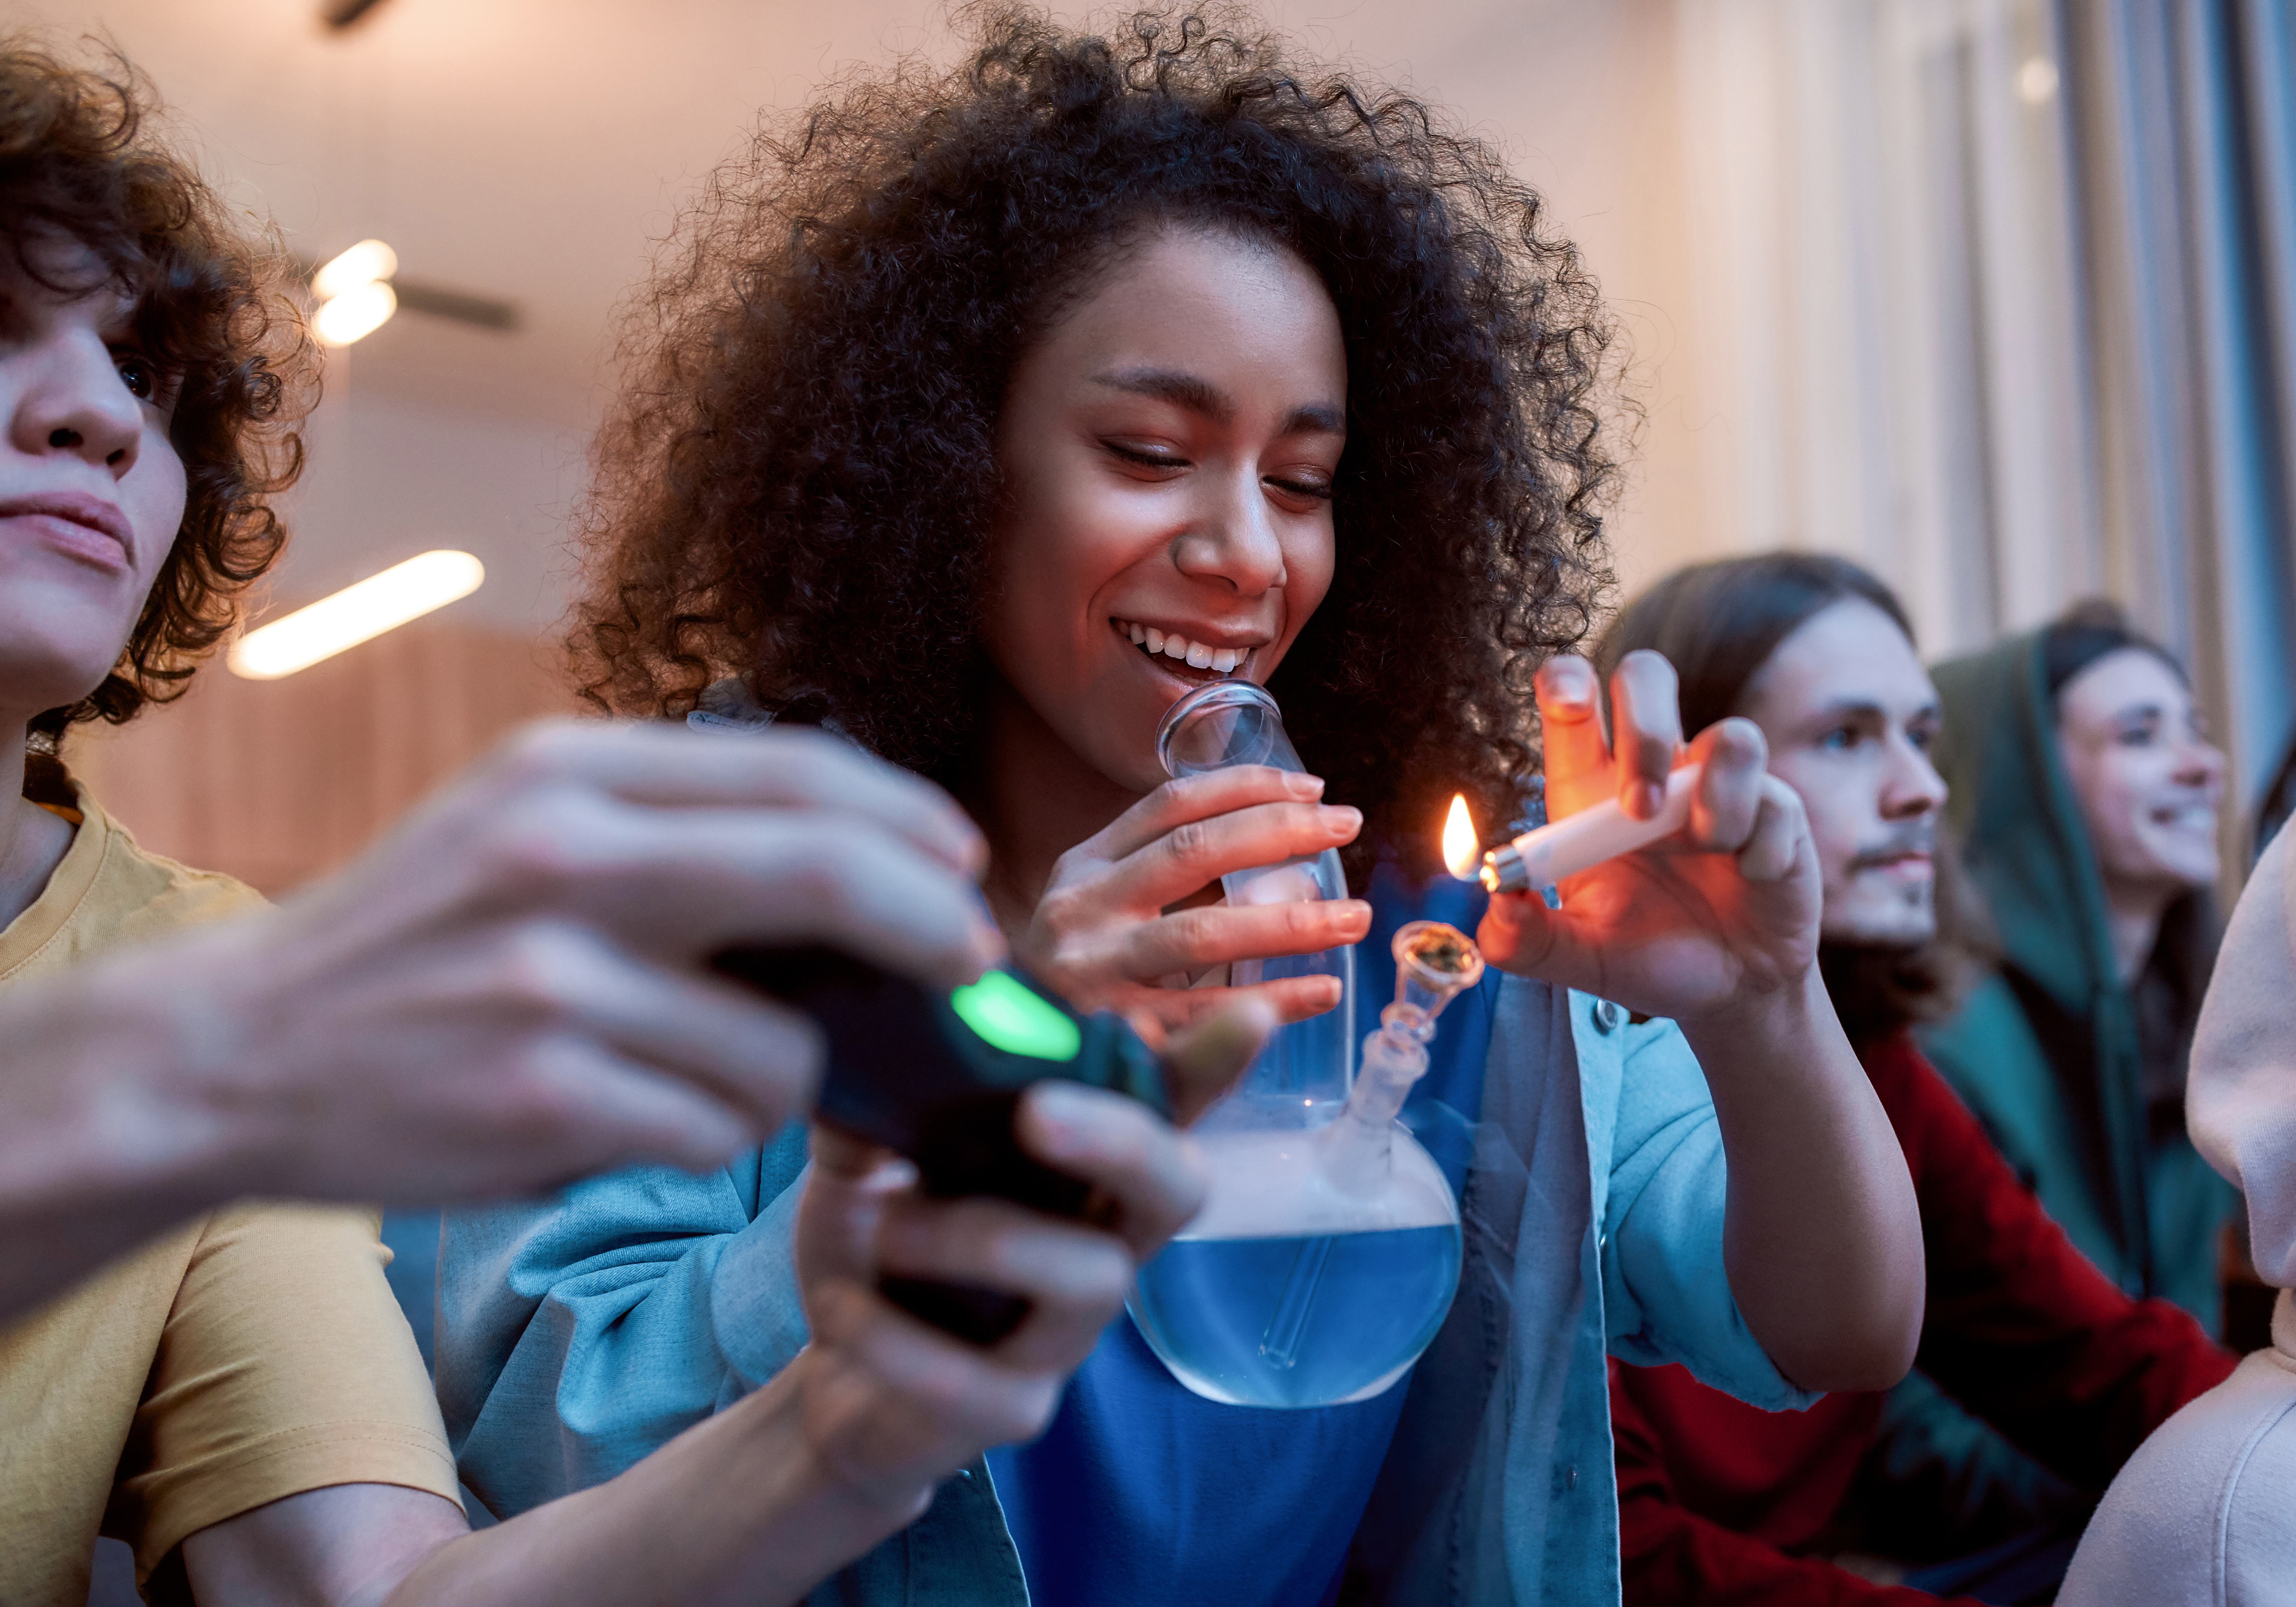 Seven Video Games that go great with Cannabis